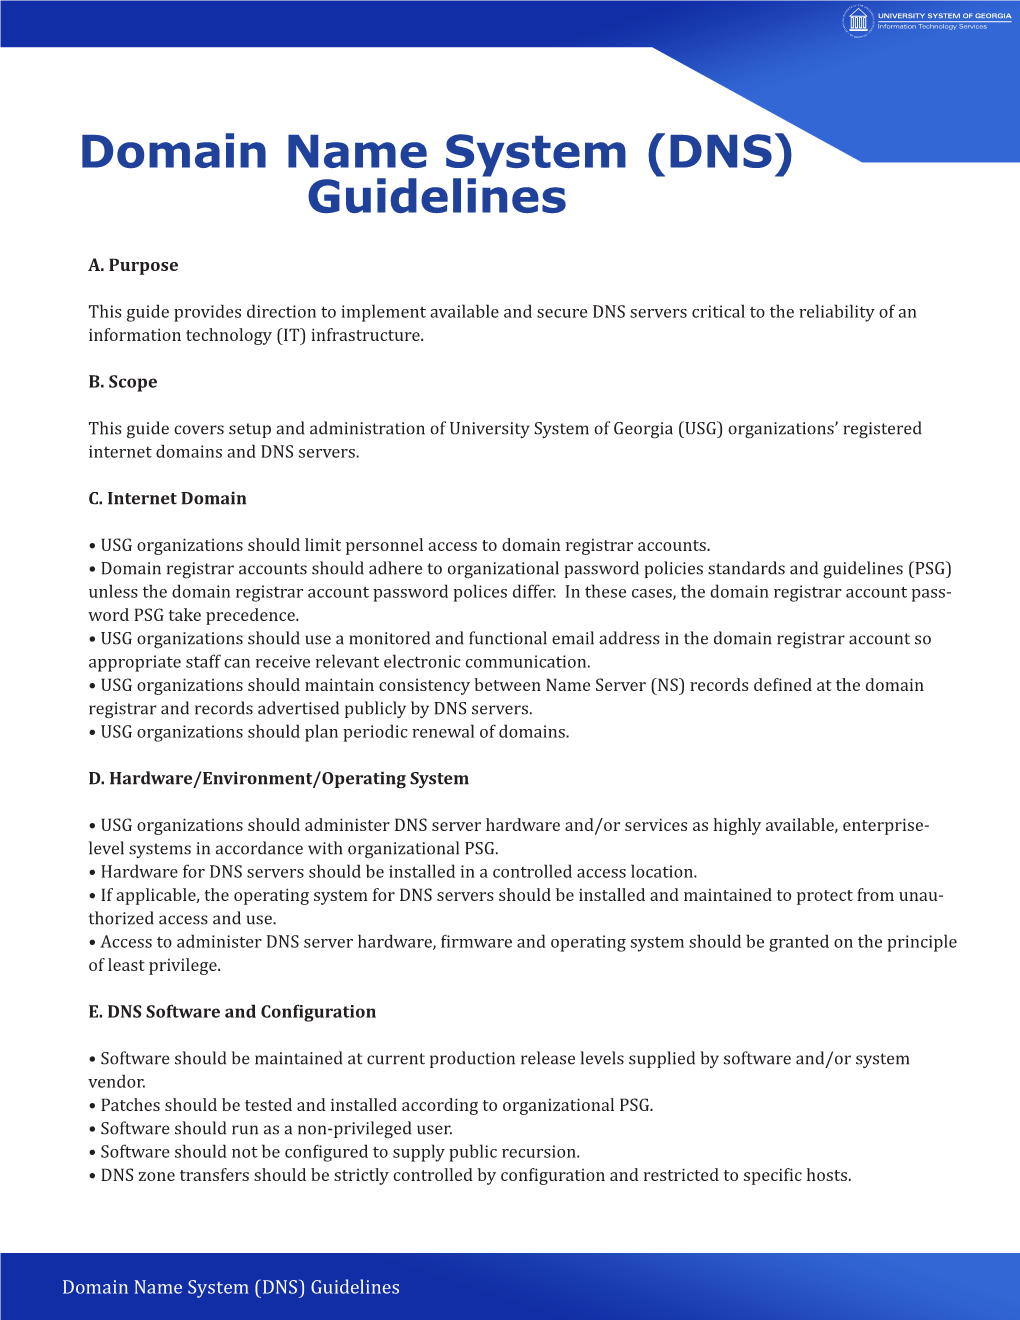 Domain Name System (DNS) Guidelines